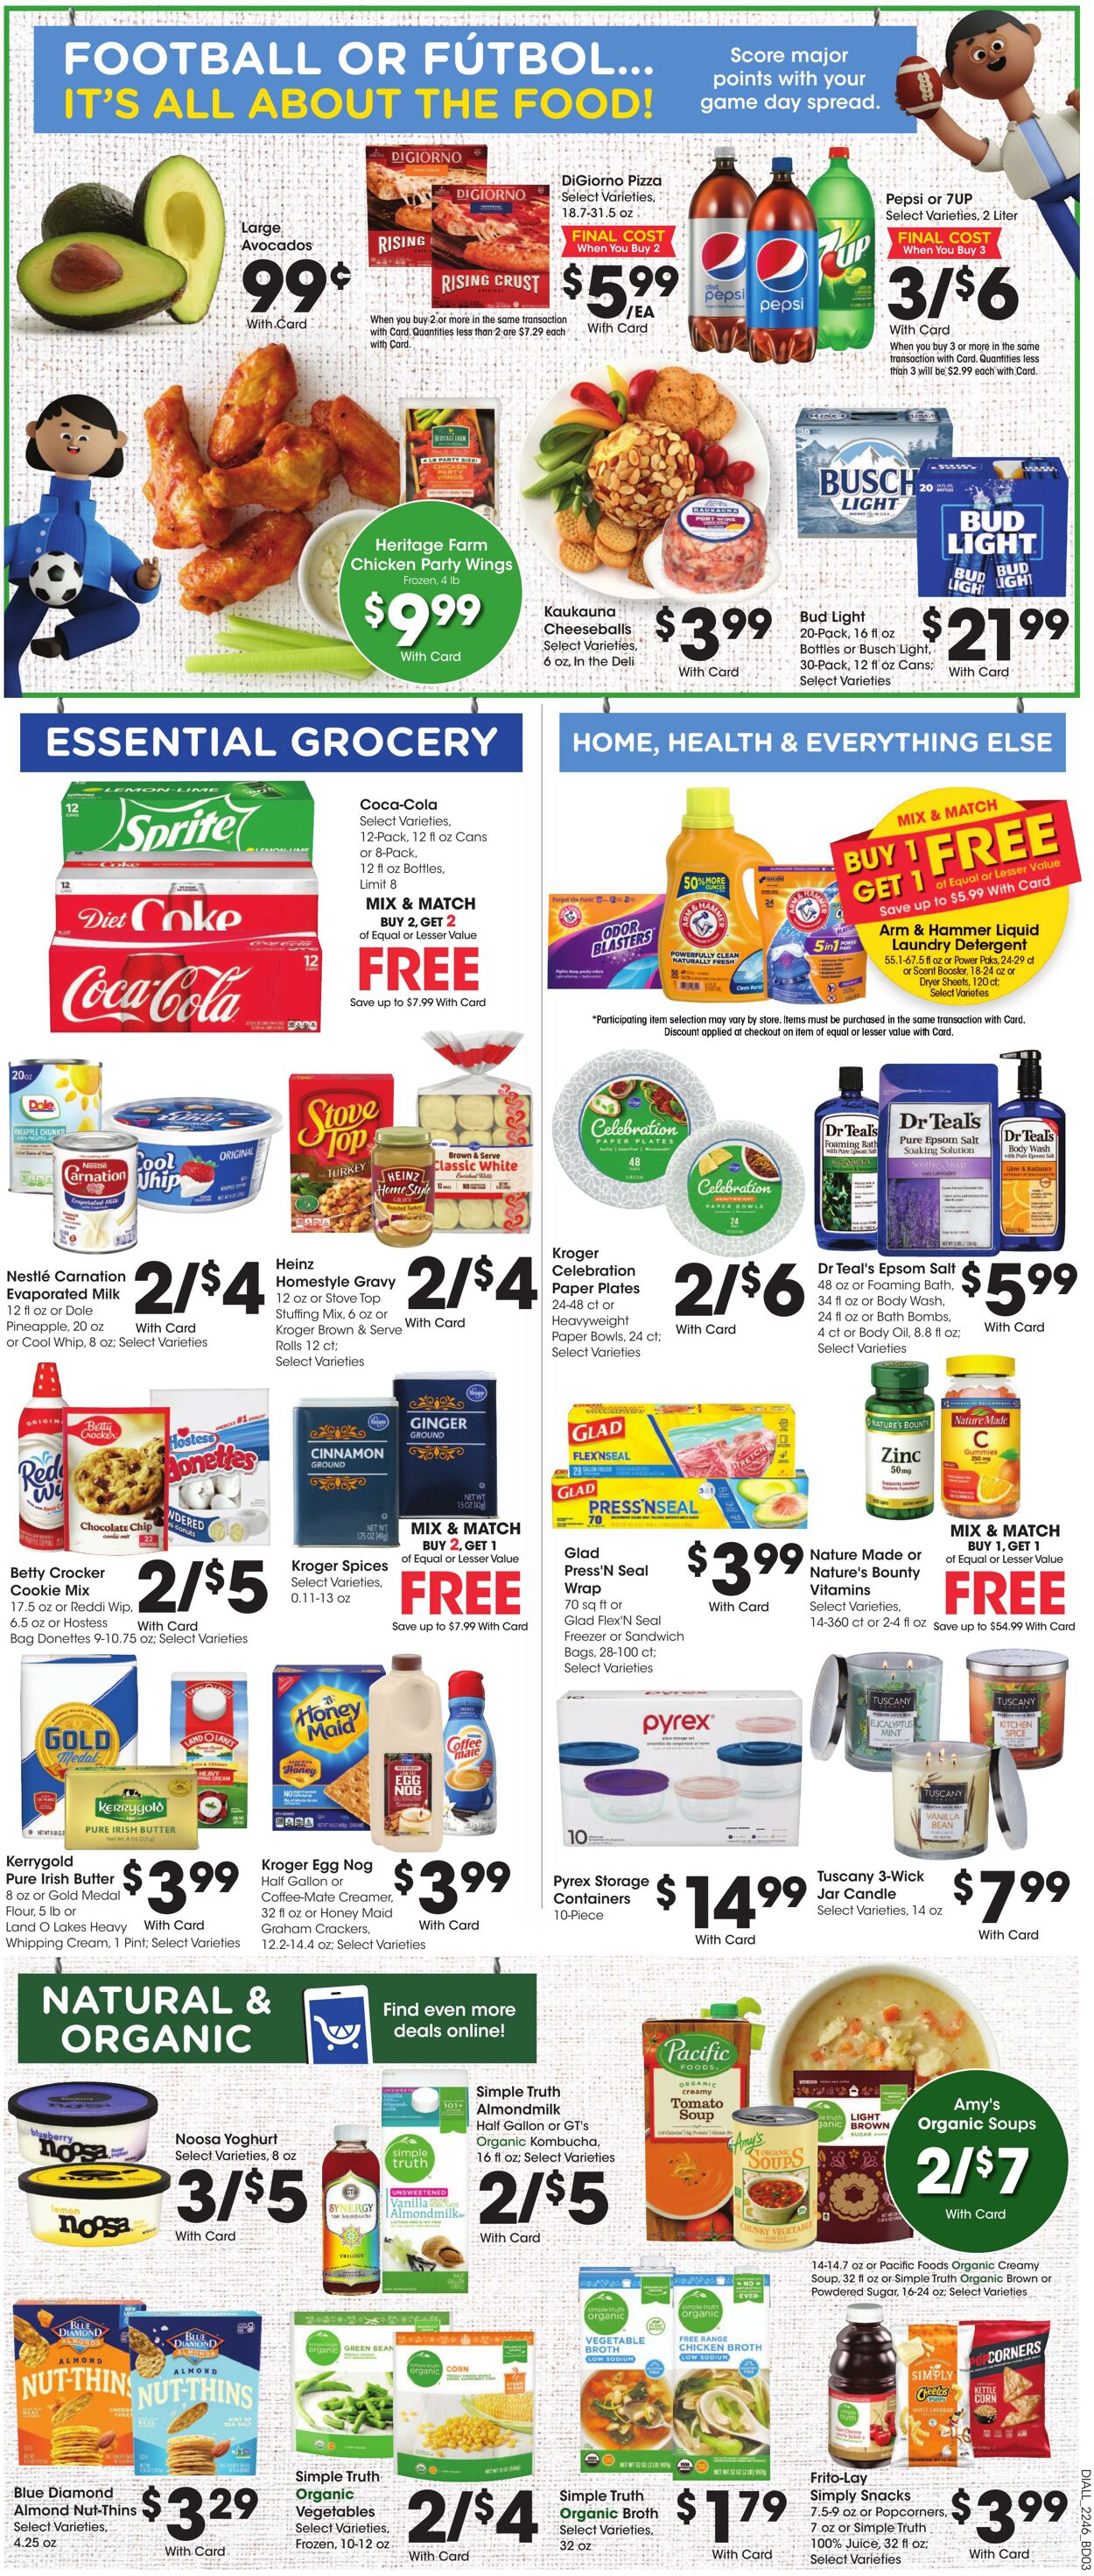 Weekly ad Dillons 12/14/2022 - 12/20/2022